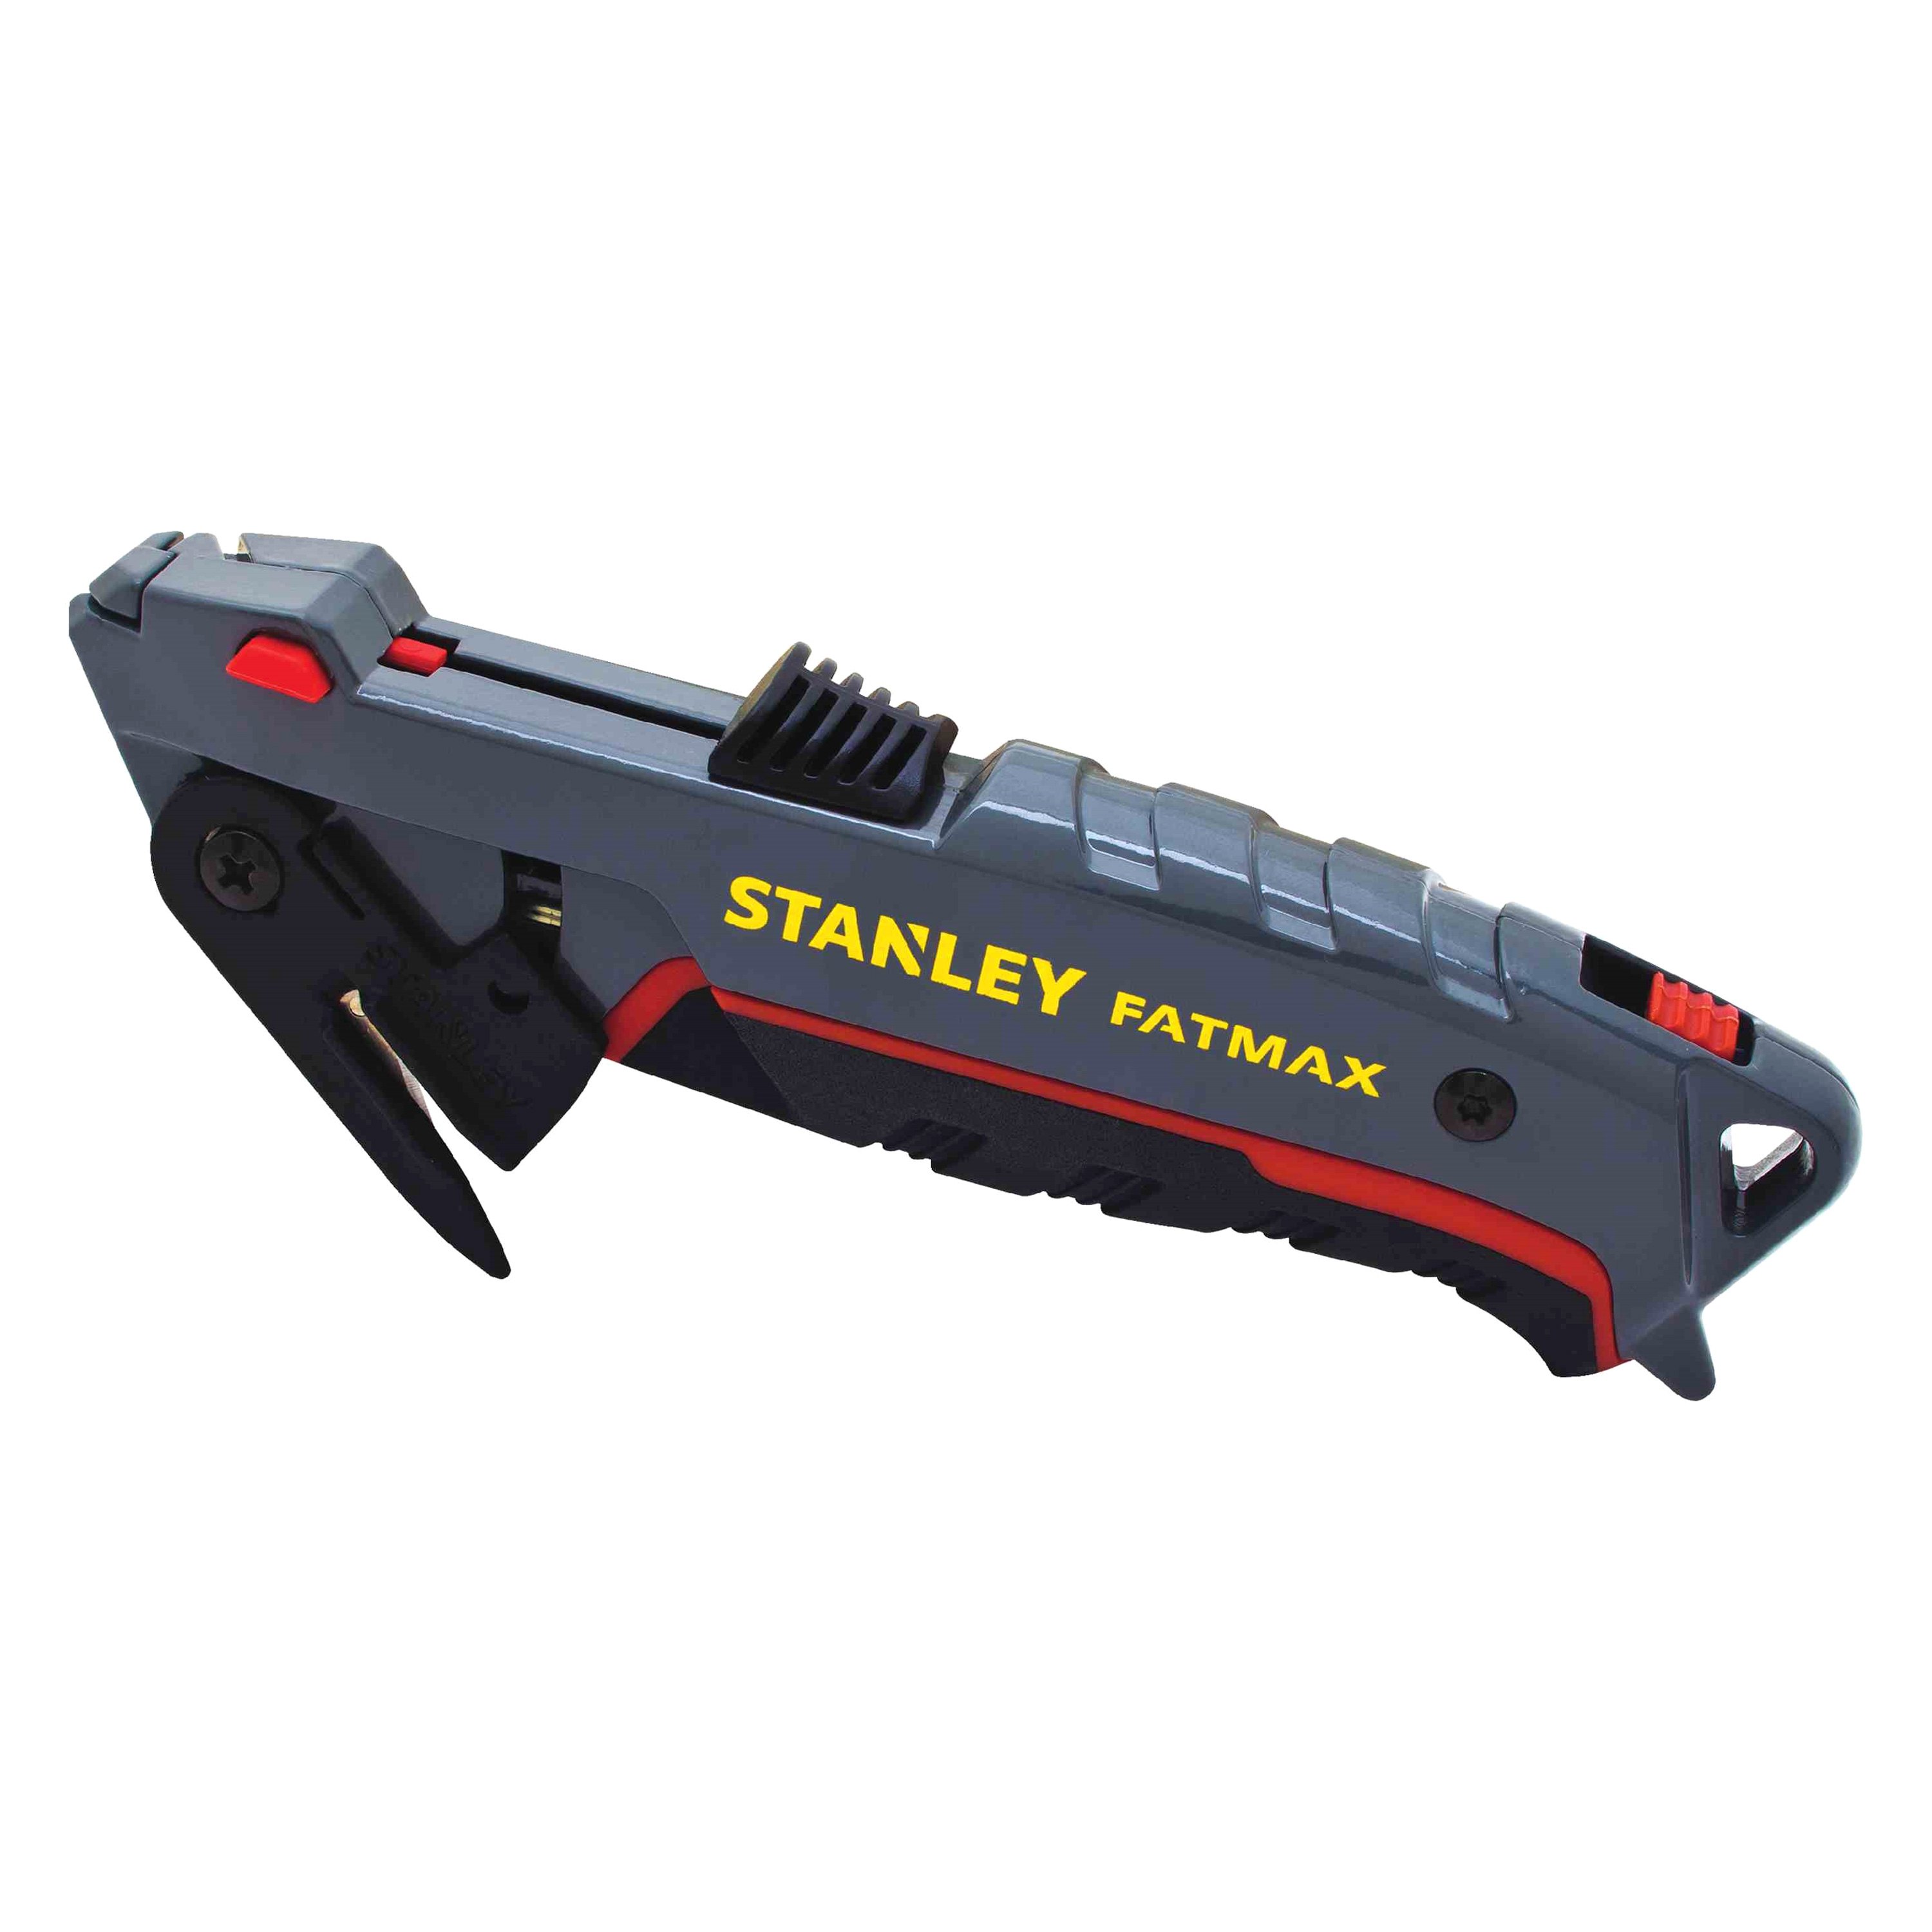 Stanley FatMax Safety Knife Review: Get Your Auto-Retraction On